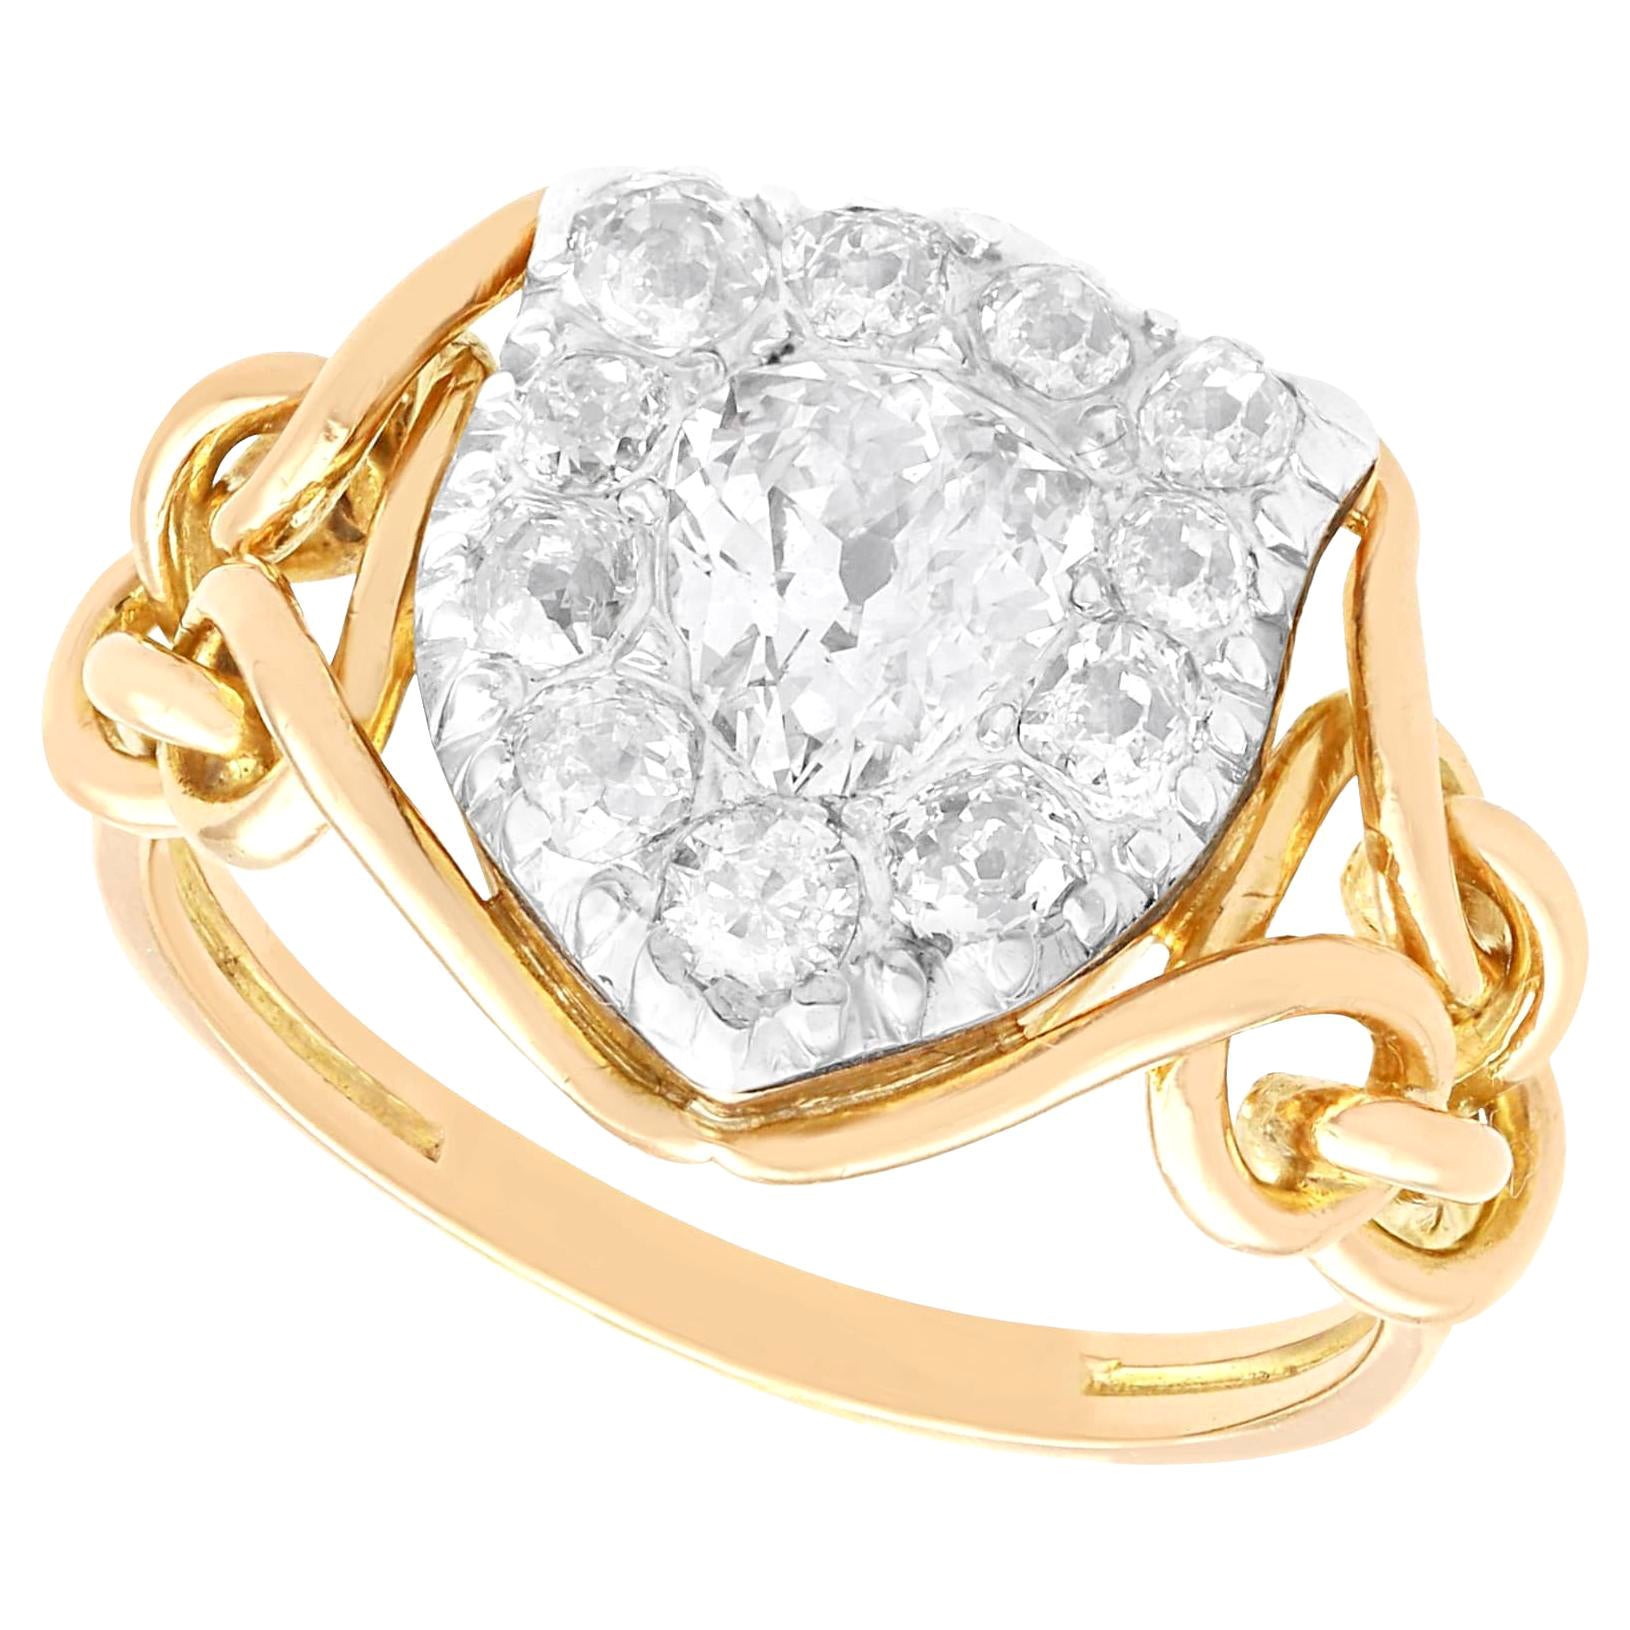 Antique 2.05 Carat Diamond and Yellow Gold Dress Ring  For Sale